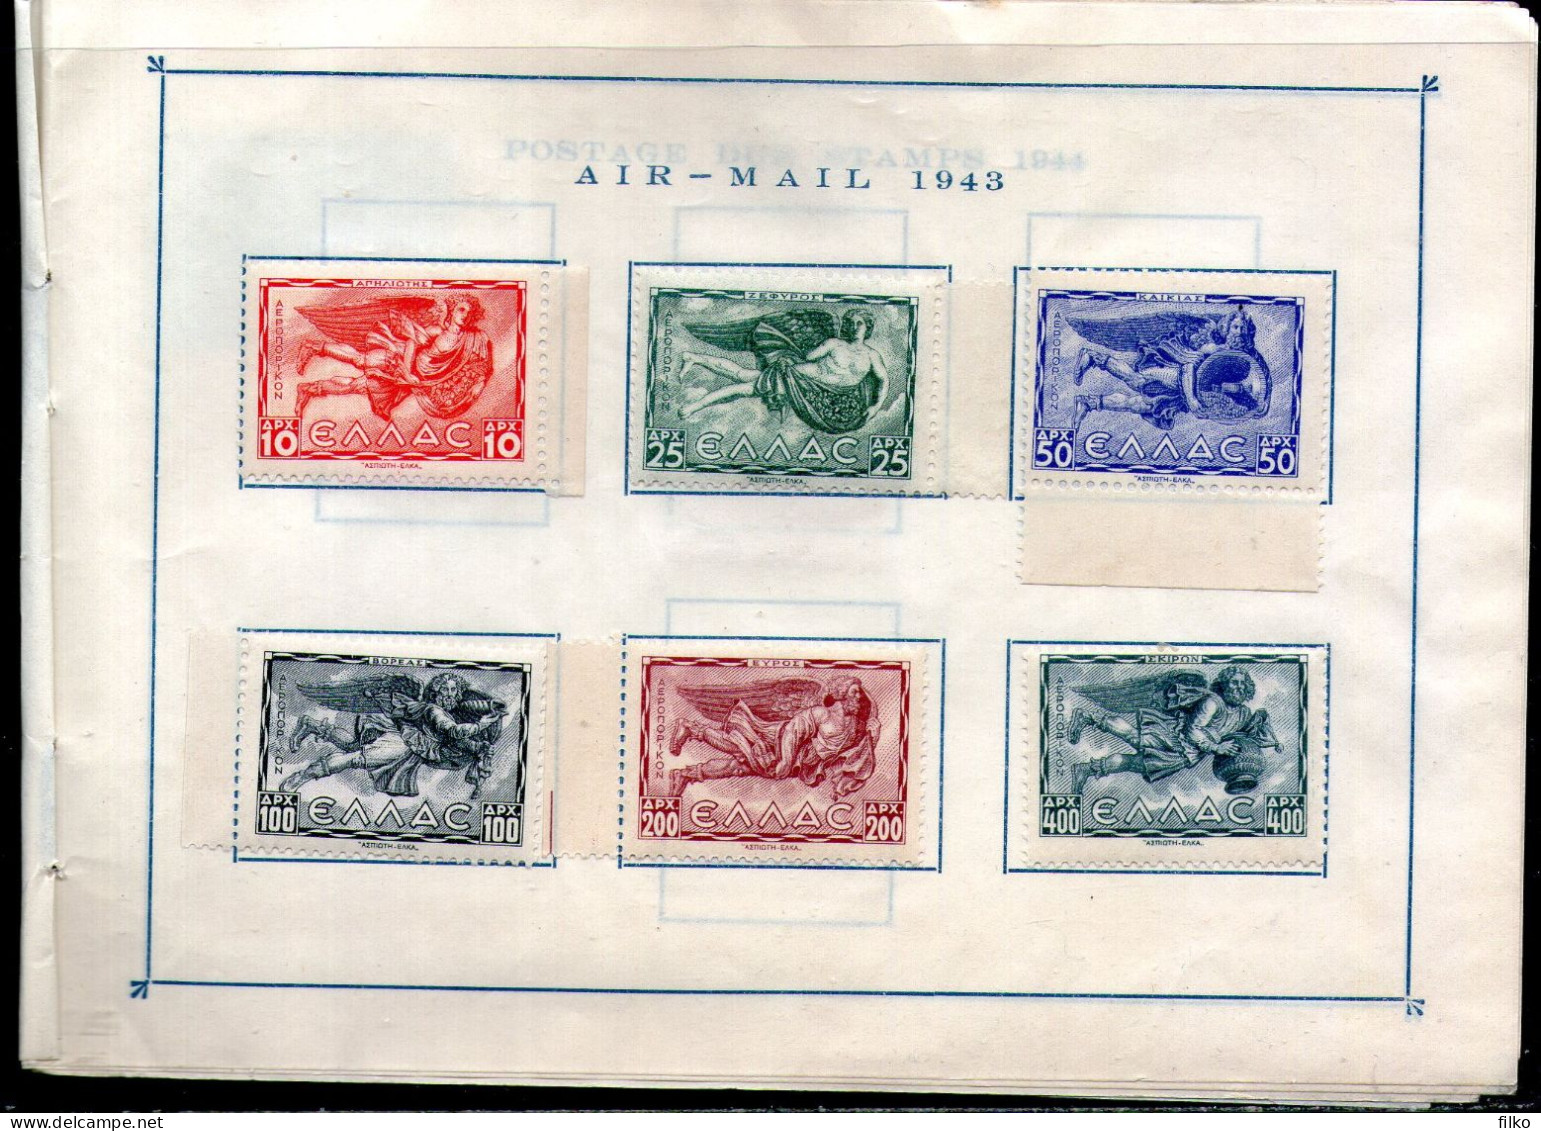 Greece,Book for stamps issued during the WWII period MLH * ,,as scan